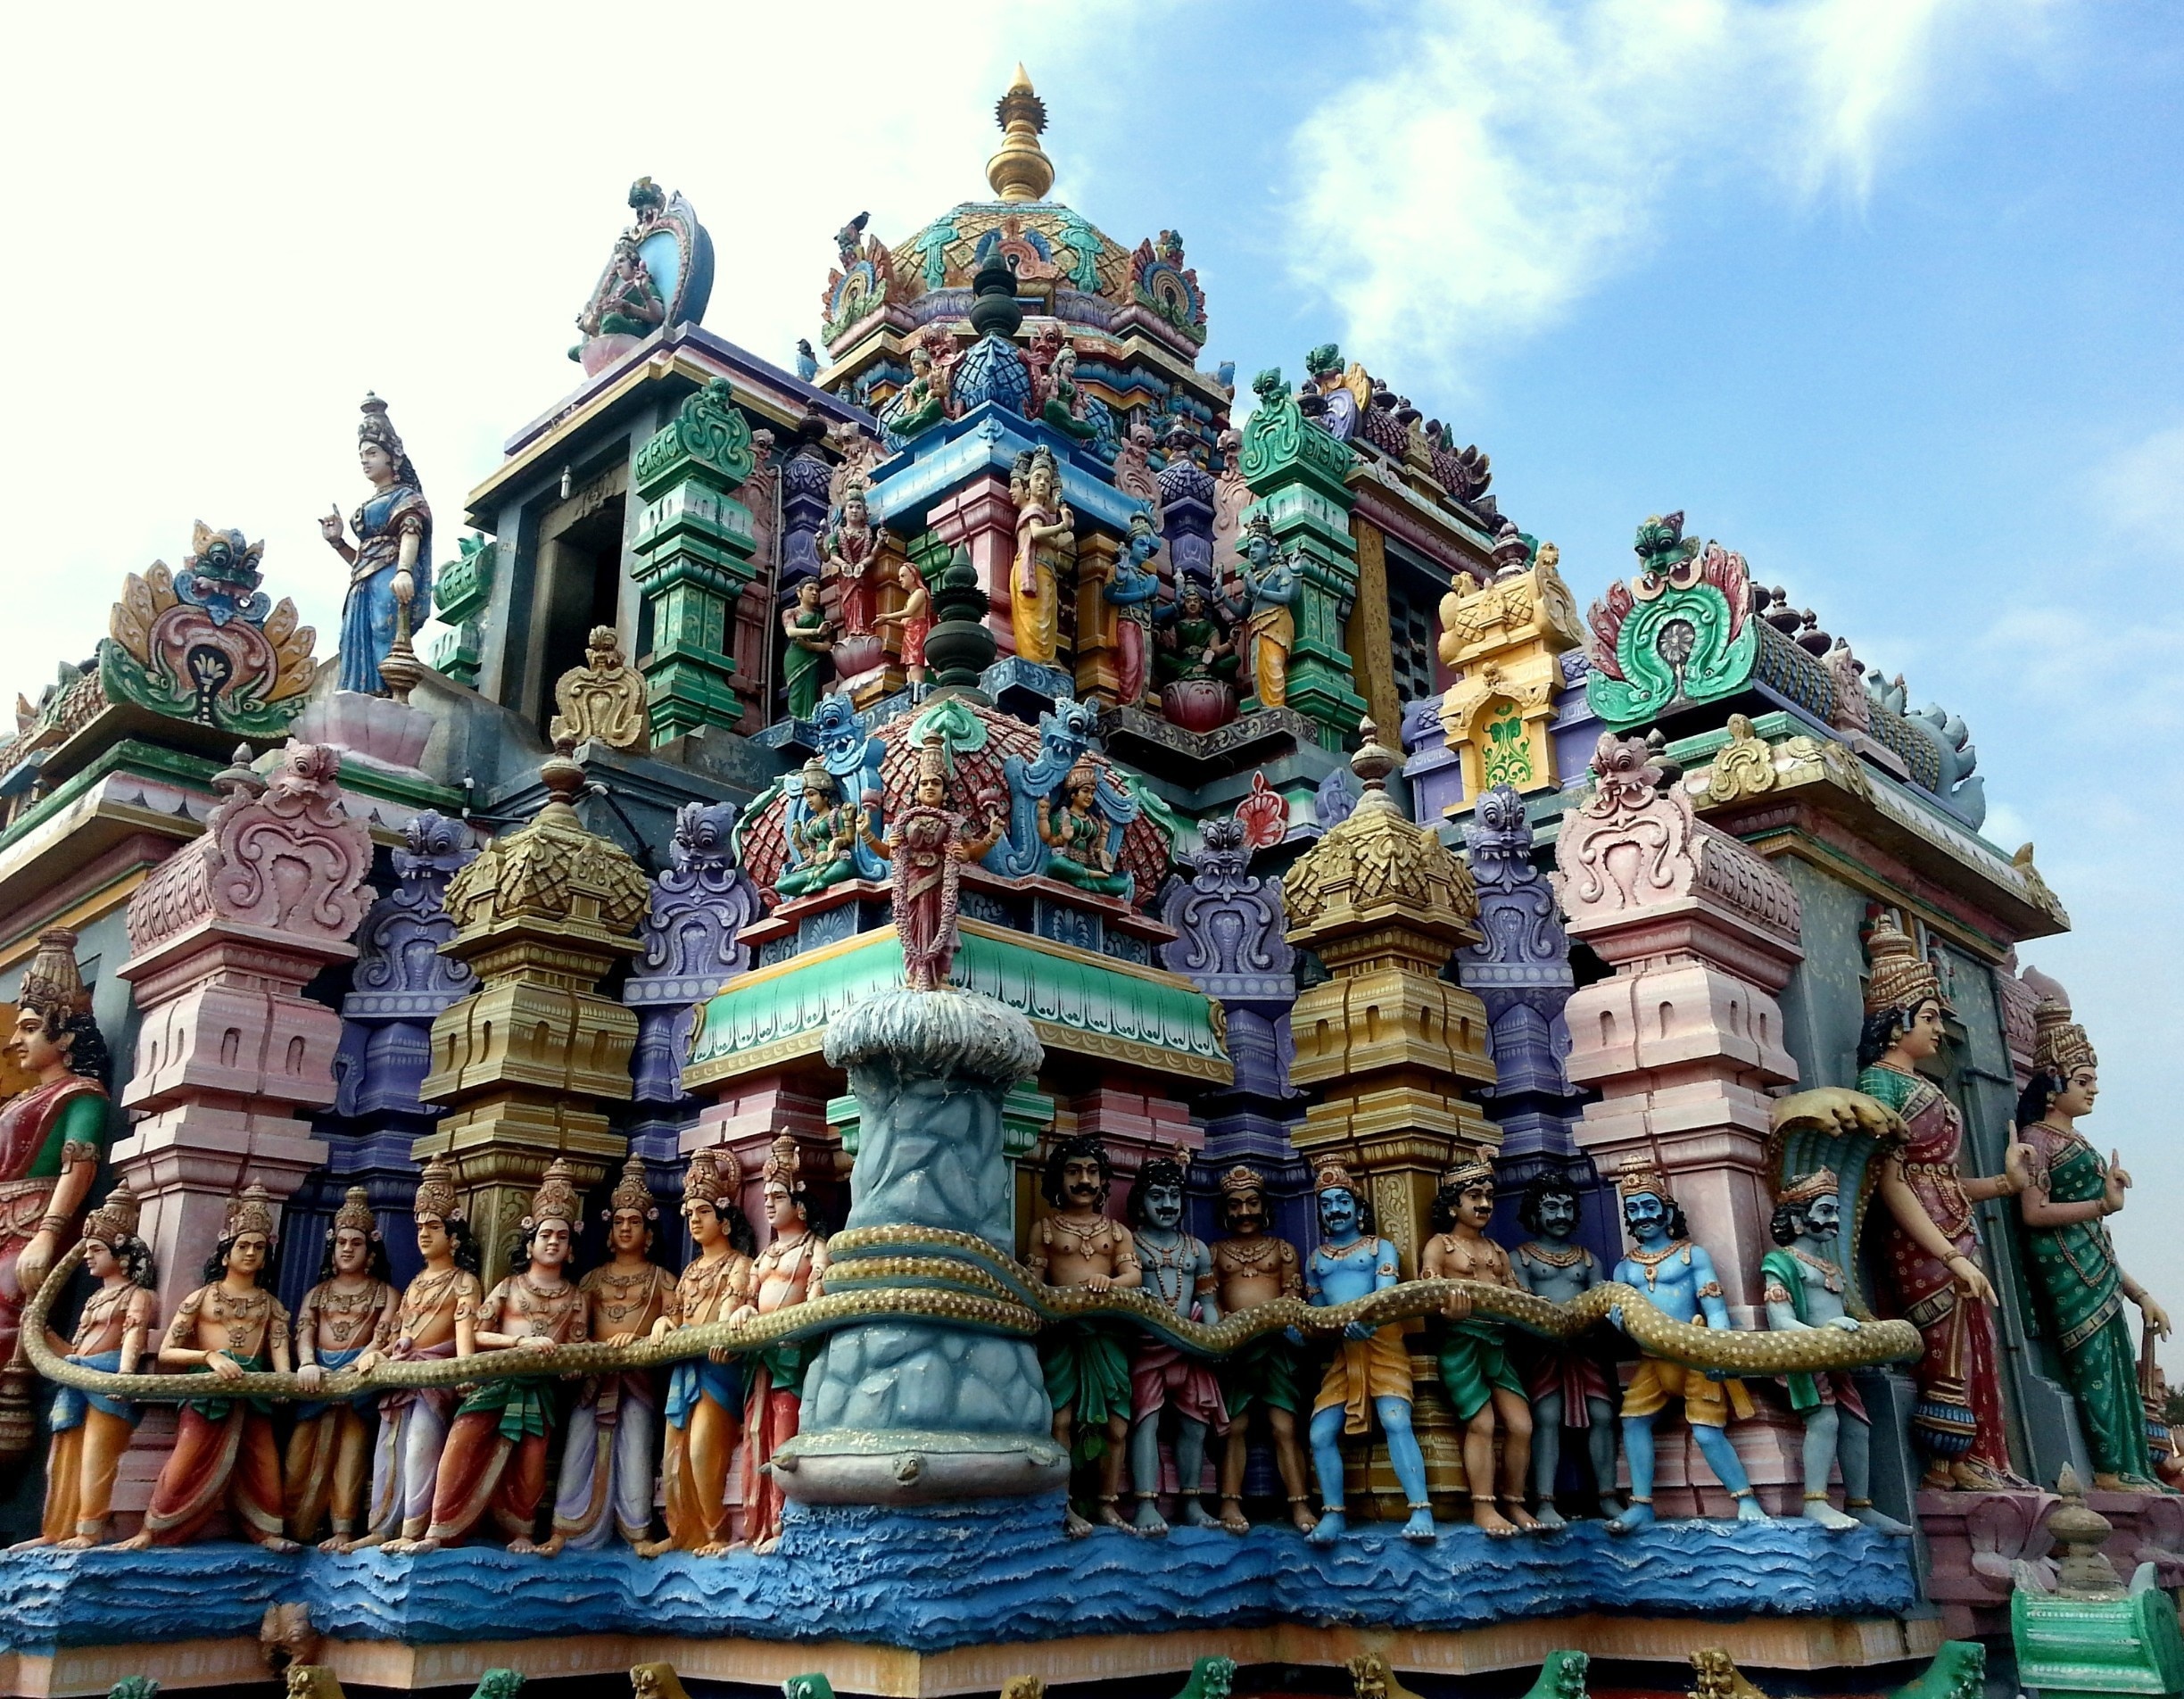 The beautiful 'gopuram' (tower) of the Ashtalakshmi Temple in Chennai, India.

Indian Hindu Gods and Goddesses meticulously sculpted. Note the large snake which they are holding across them.

read more on my blog
https://theredbagandpurpleshoes.wordpress.com/2015/01/14/iconic-temples-of-chennai/